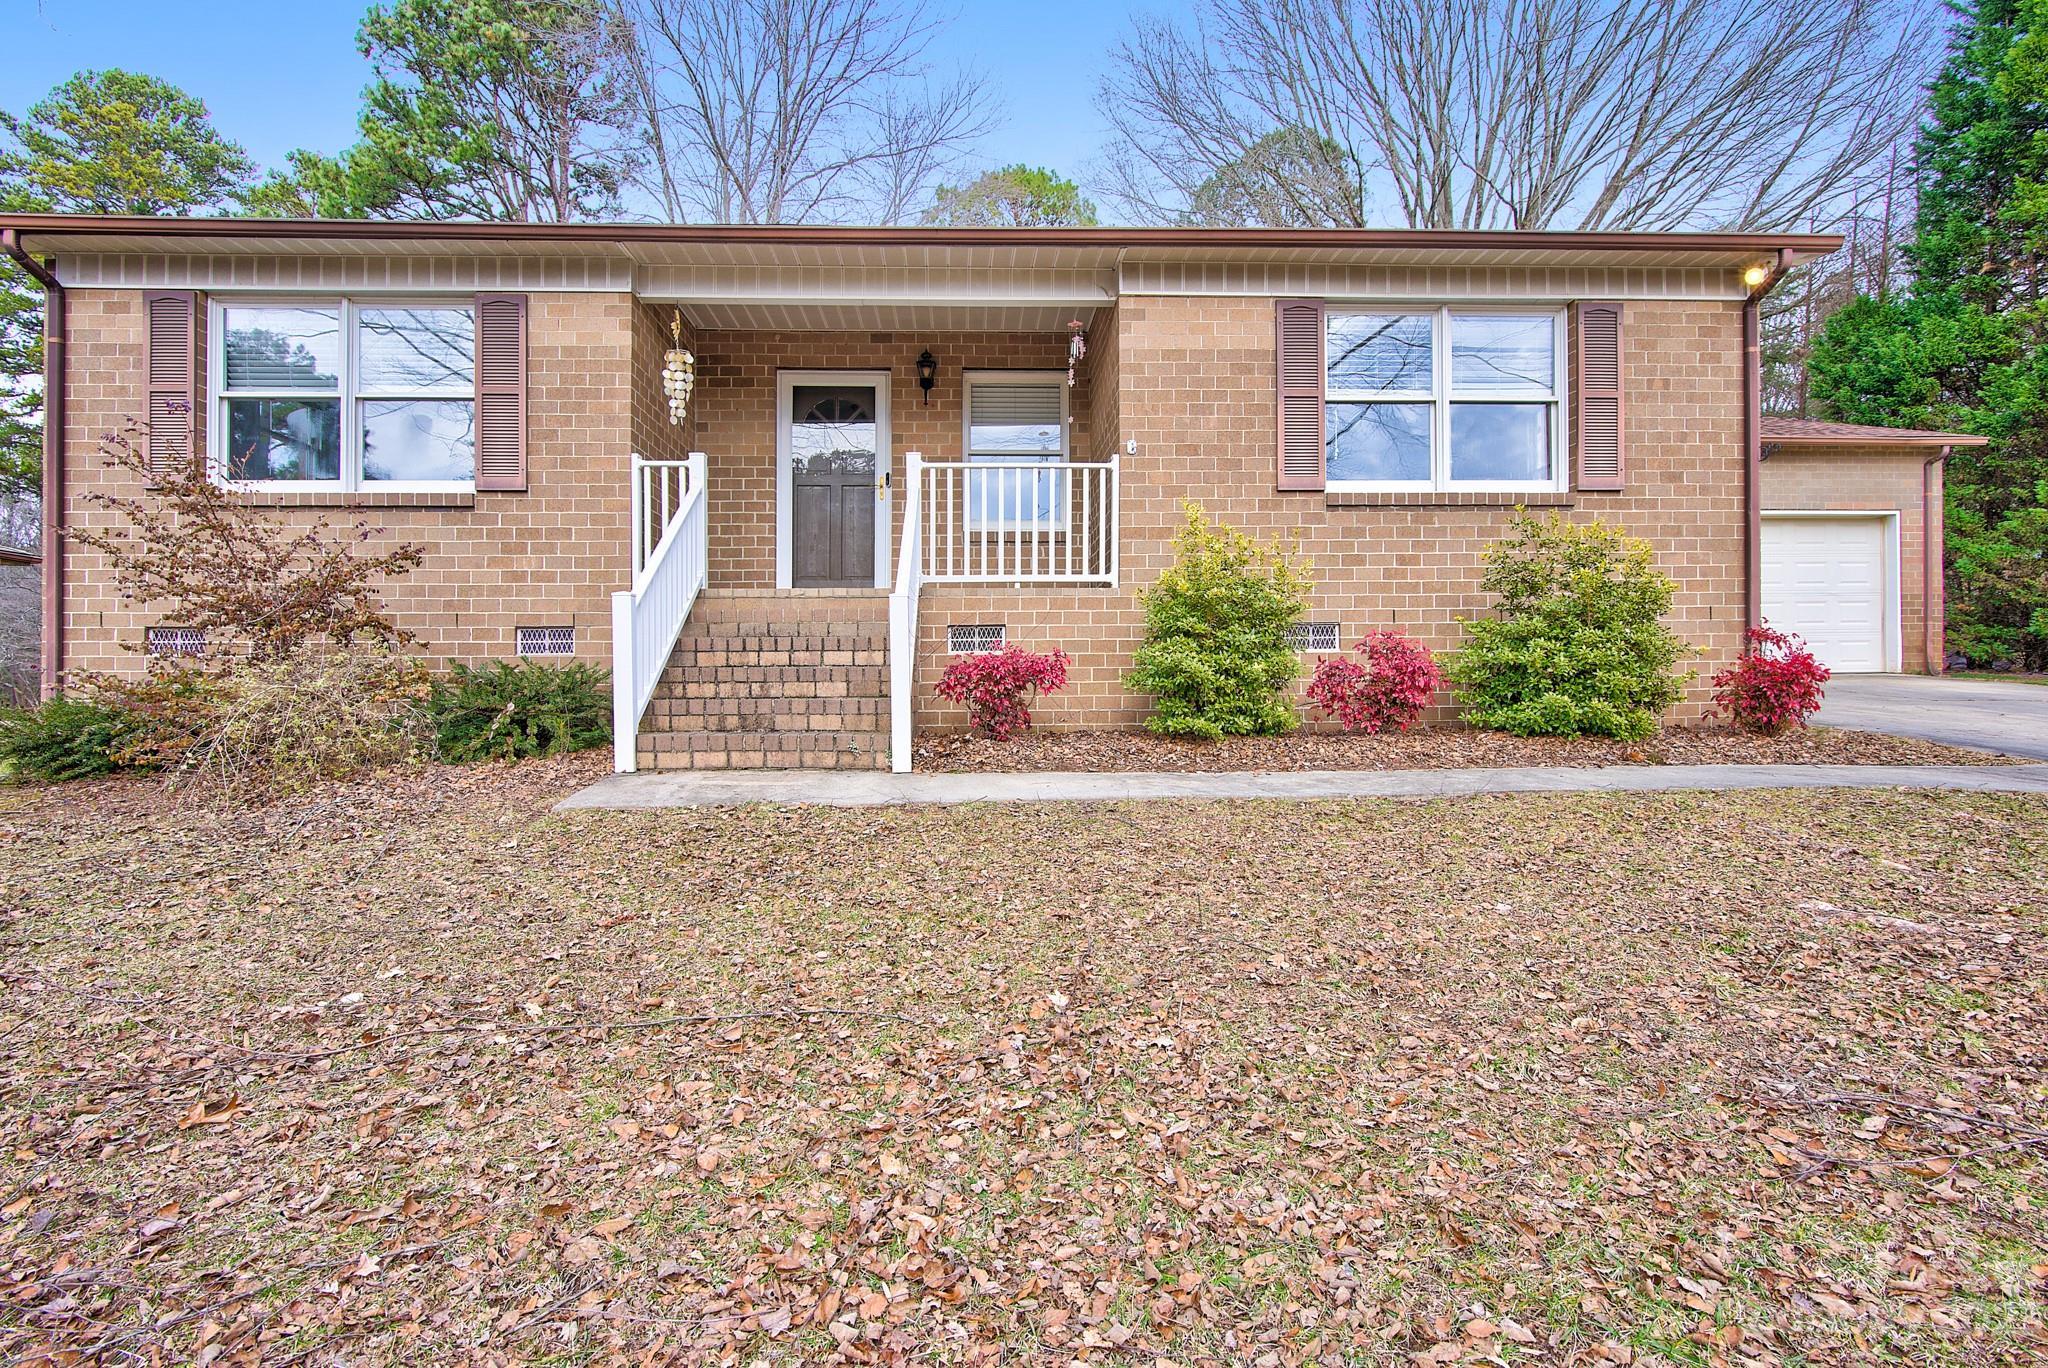 Photo one of 412 Crestwood Ln Spencer NC 28159 | MLS 4101121